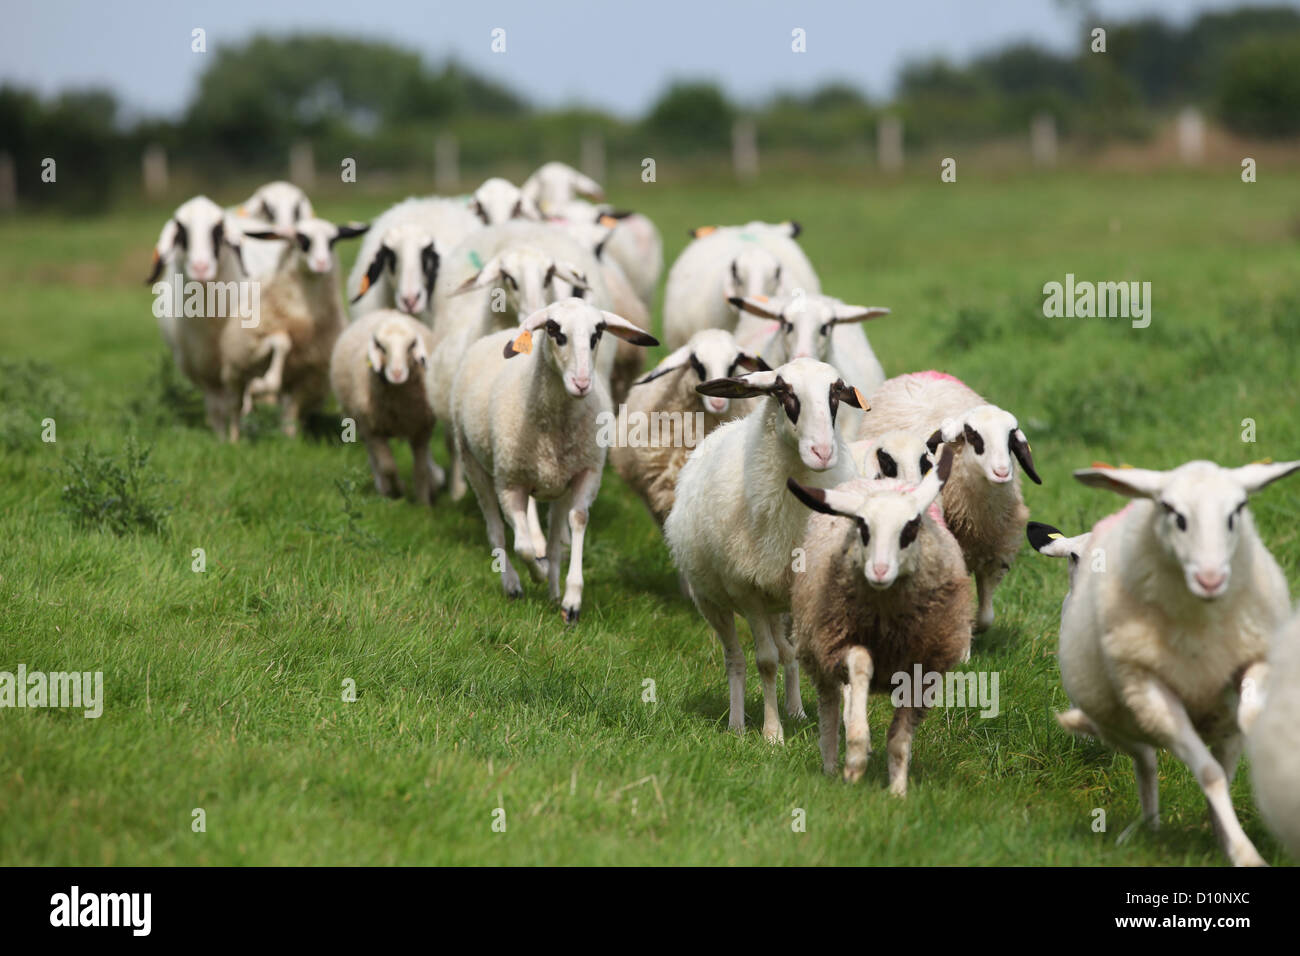 Glasses Sheep High Resolution Stock Photography and Images - Alamy